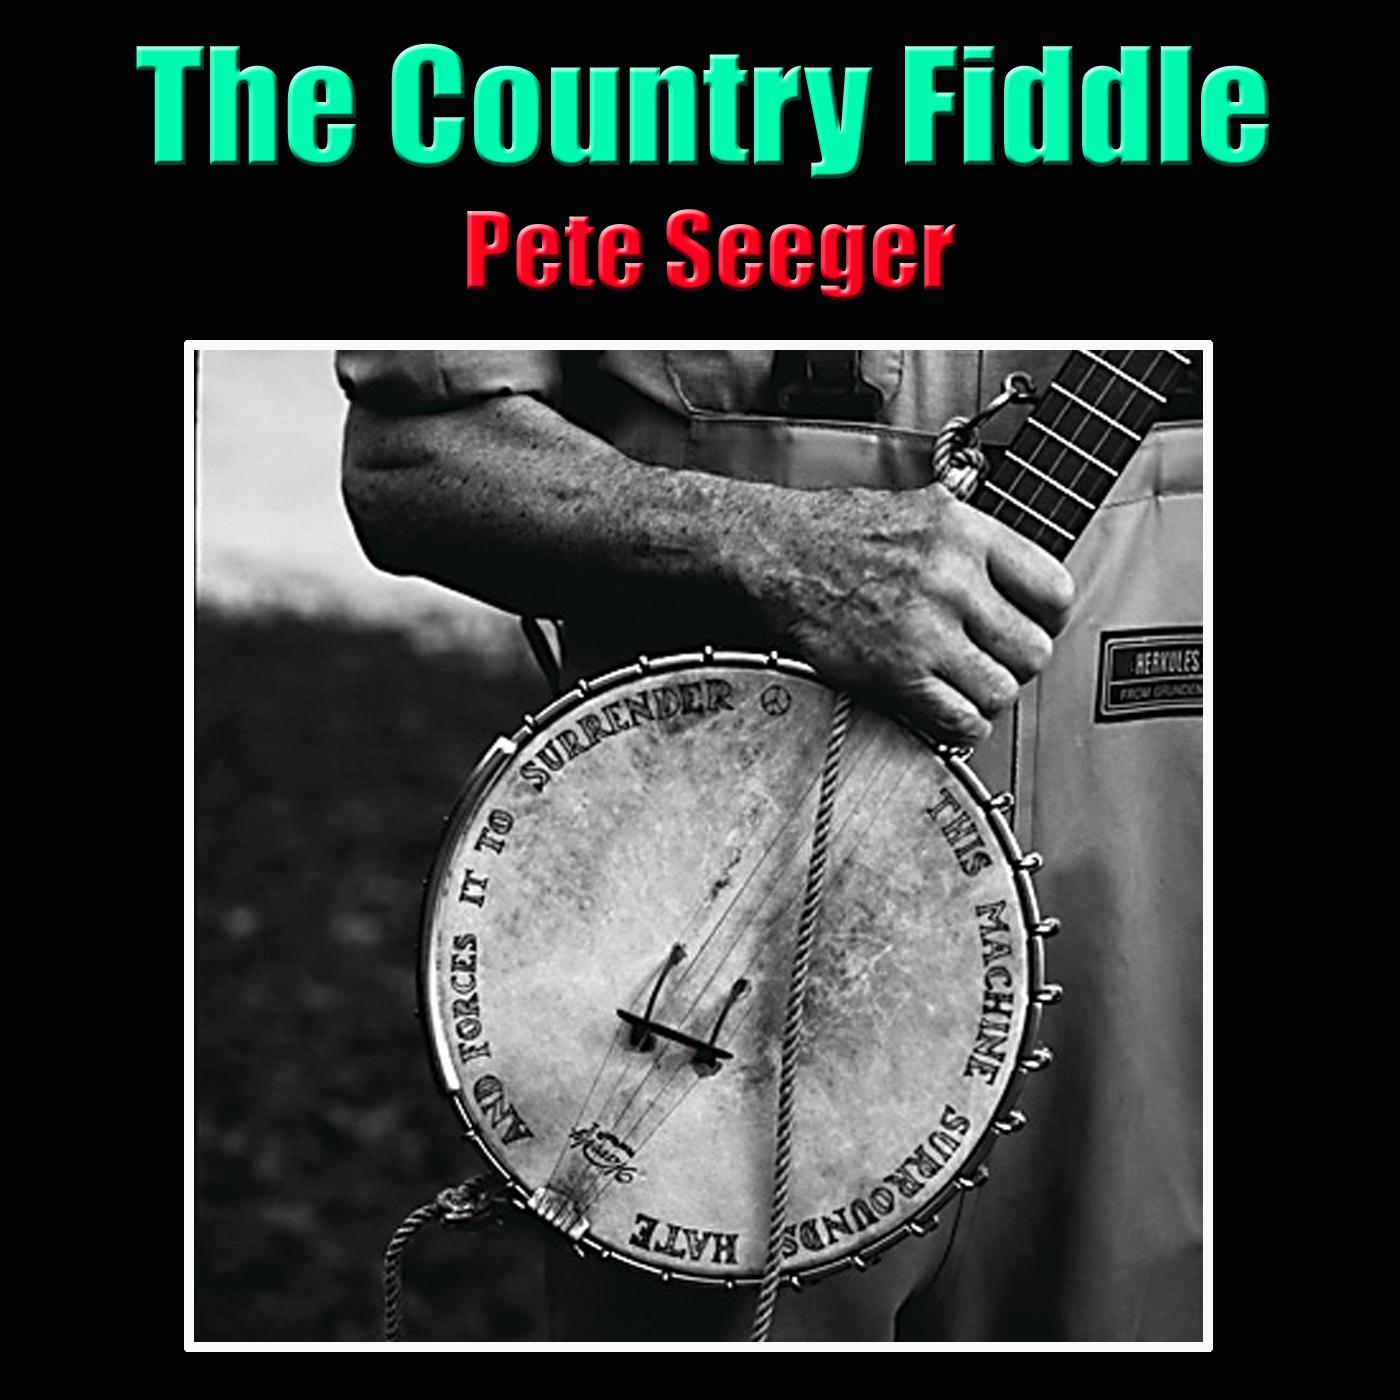 The Country Fiddle